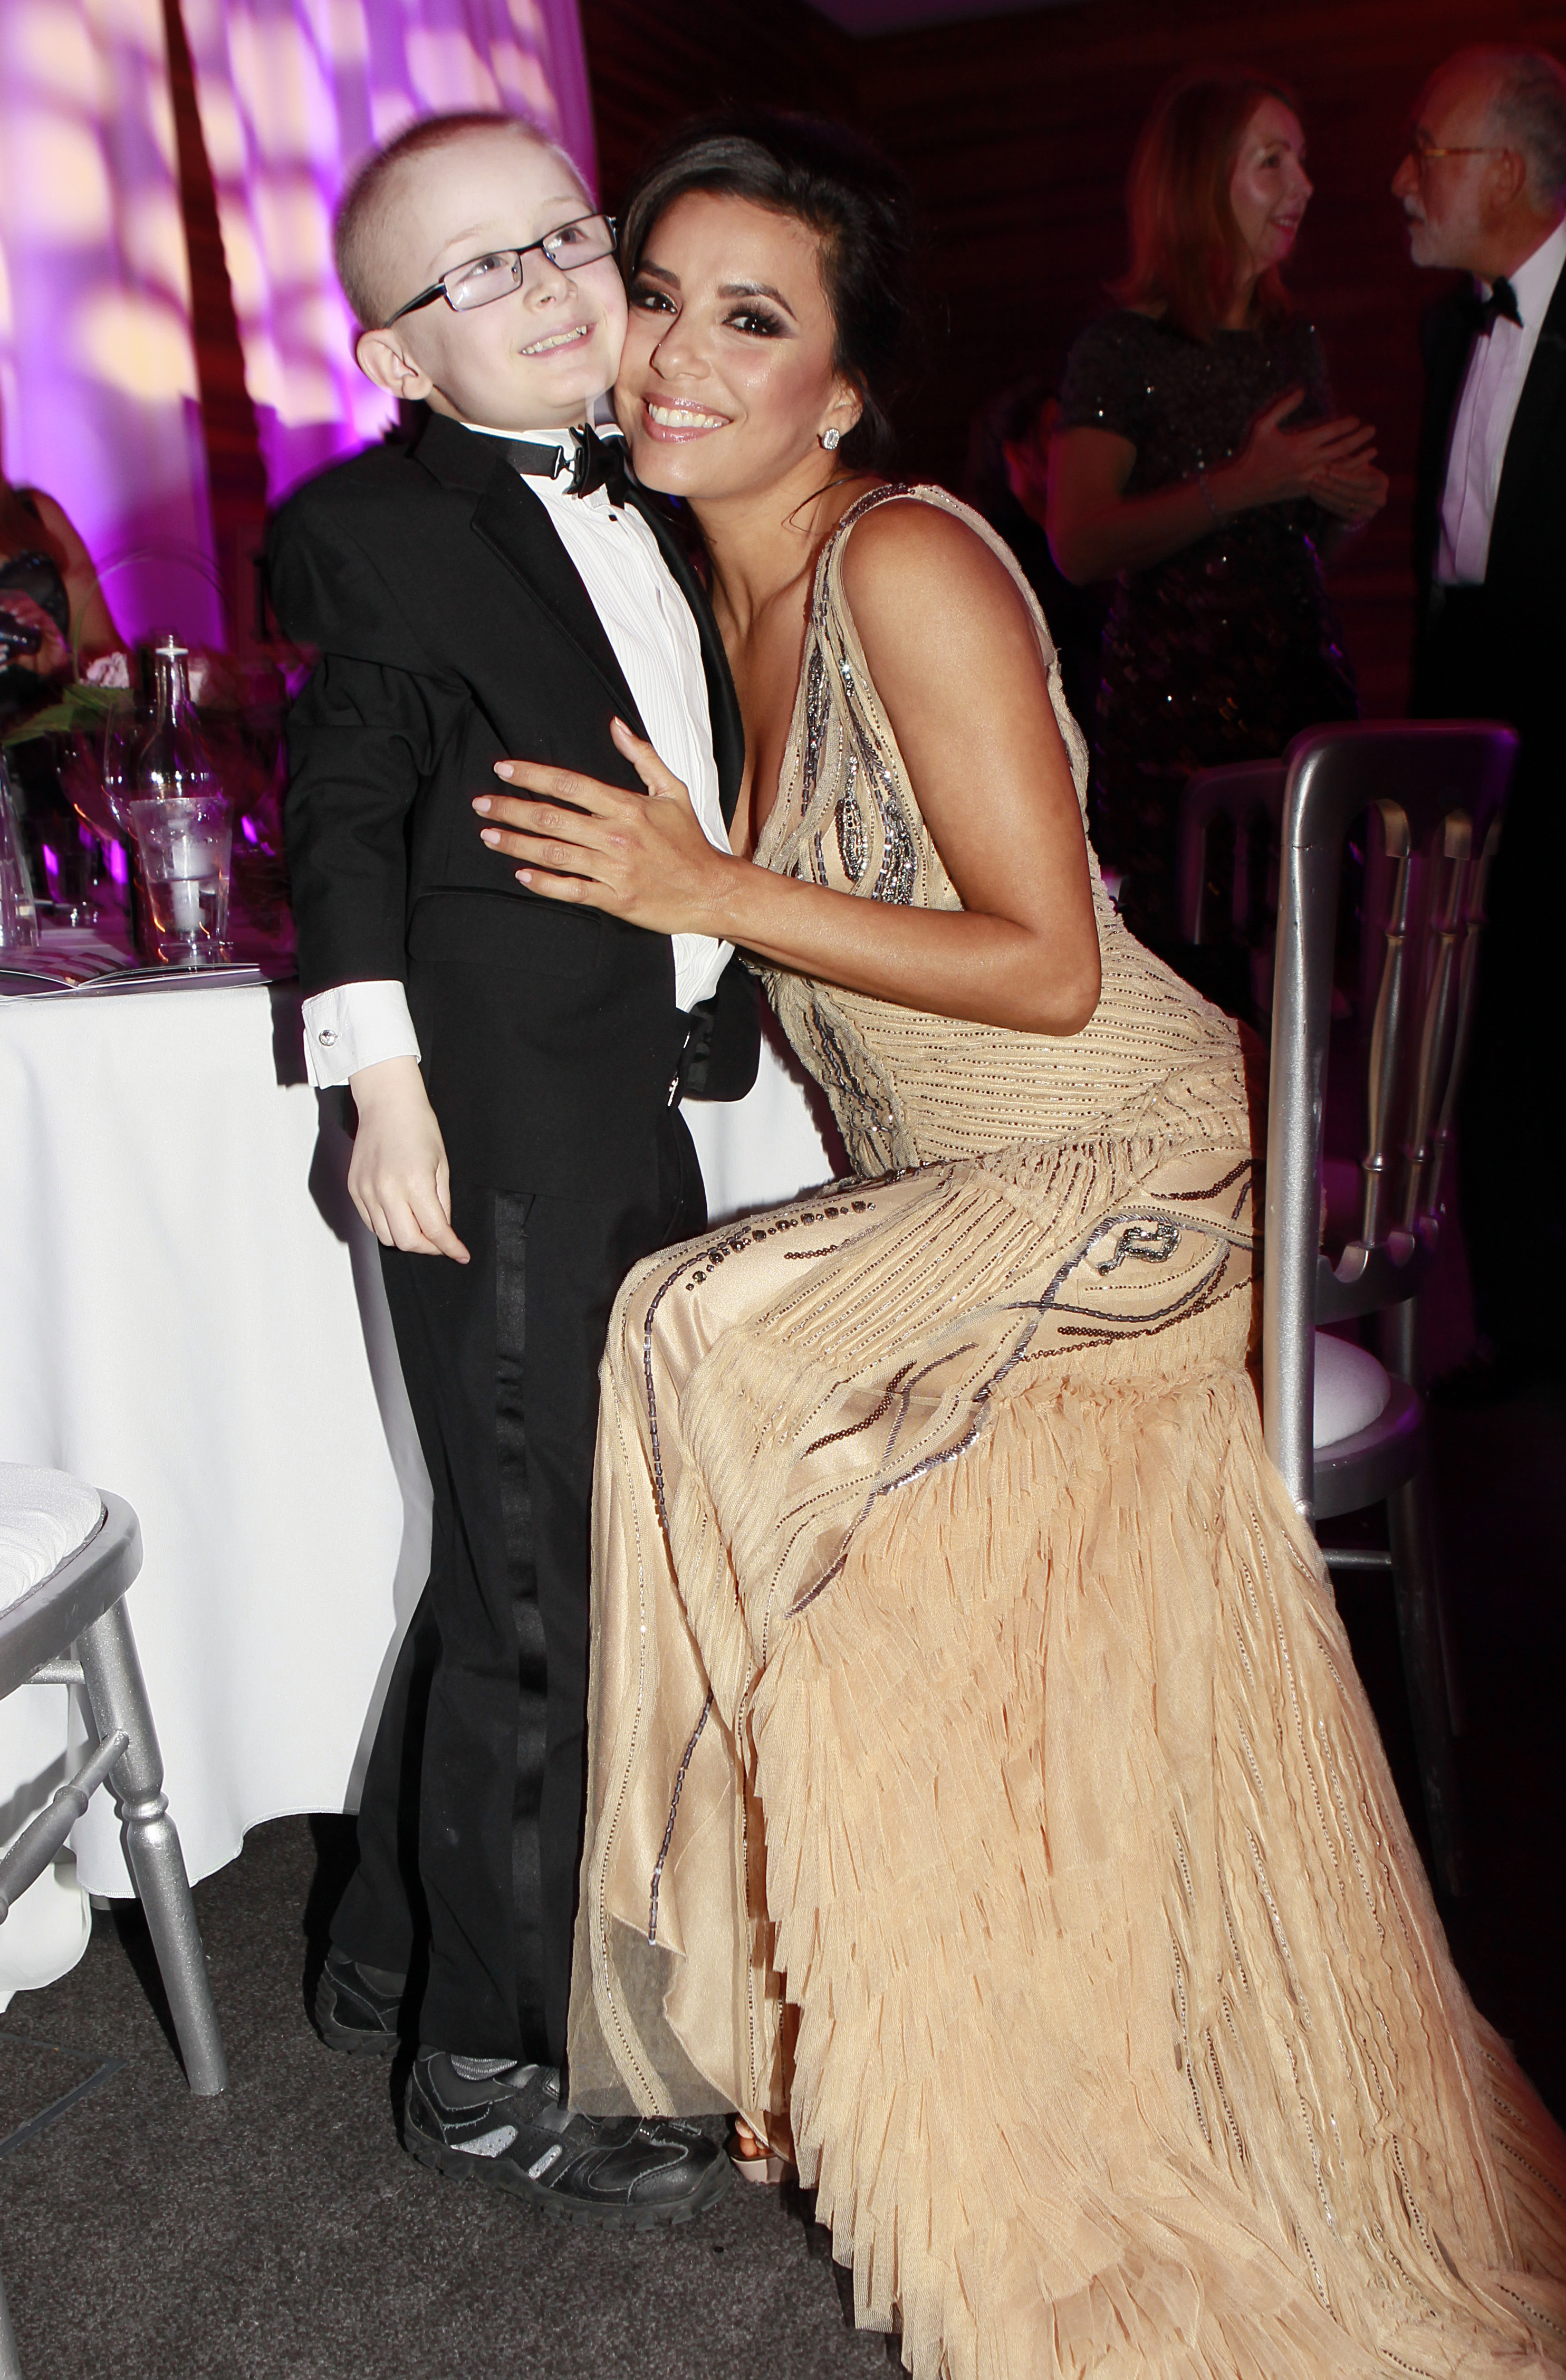 The Noble Gift Gala 2012 benefiting The Eva Longoria Foundation, Fight for Life and Caudwell Children at ME London, Britain - 08 Dec 2012